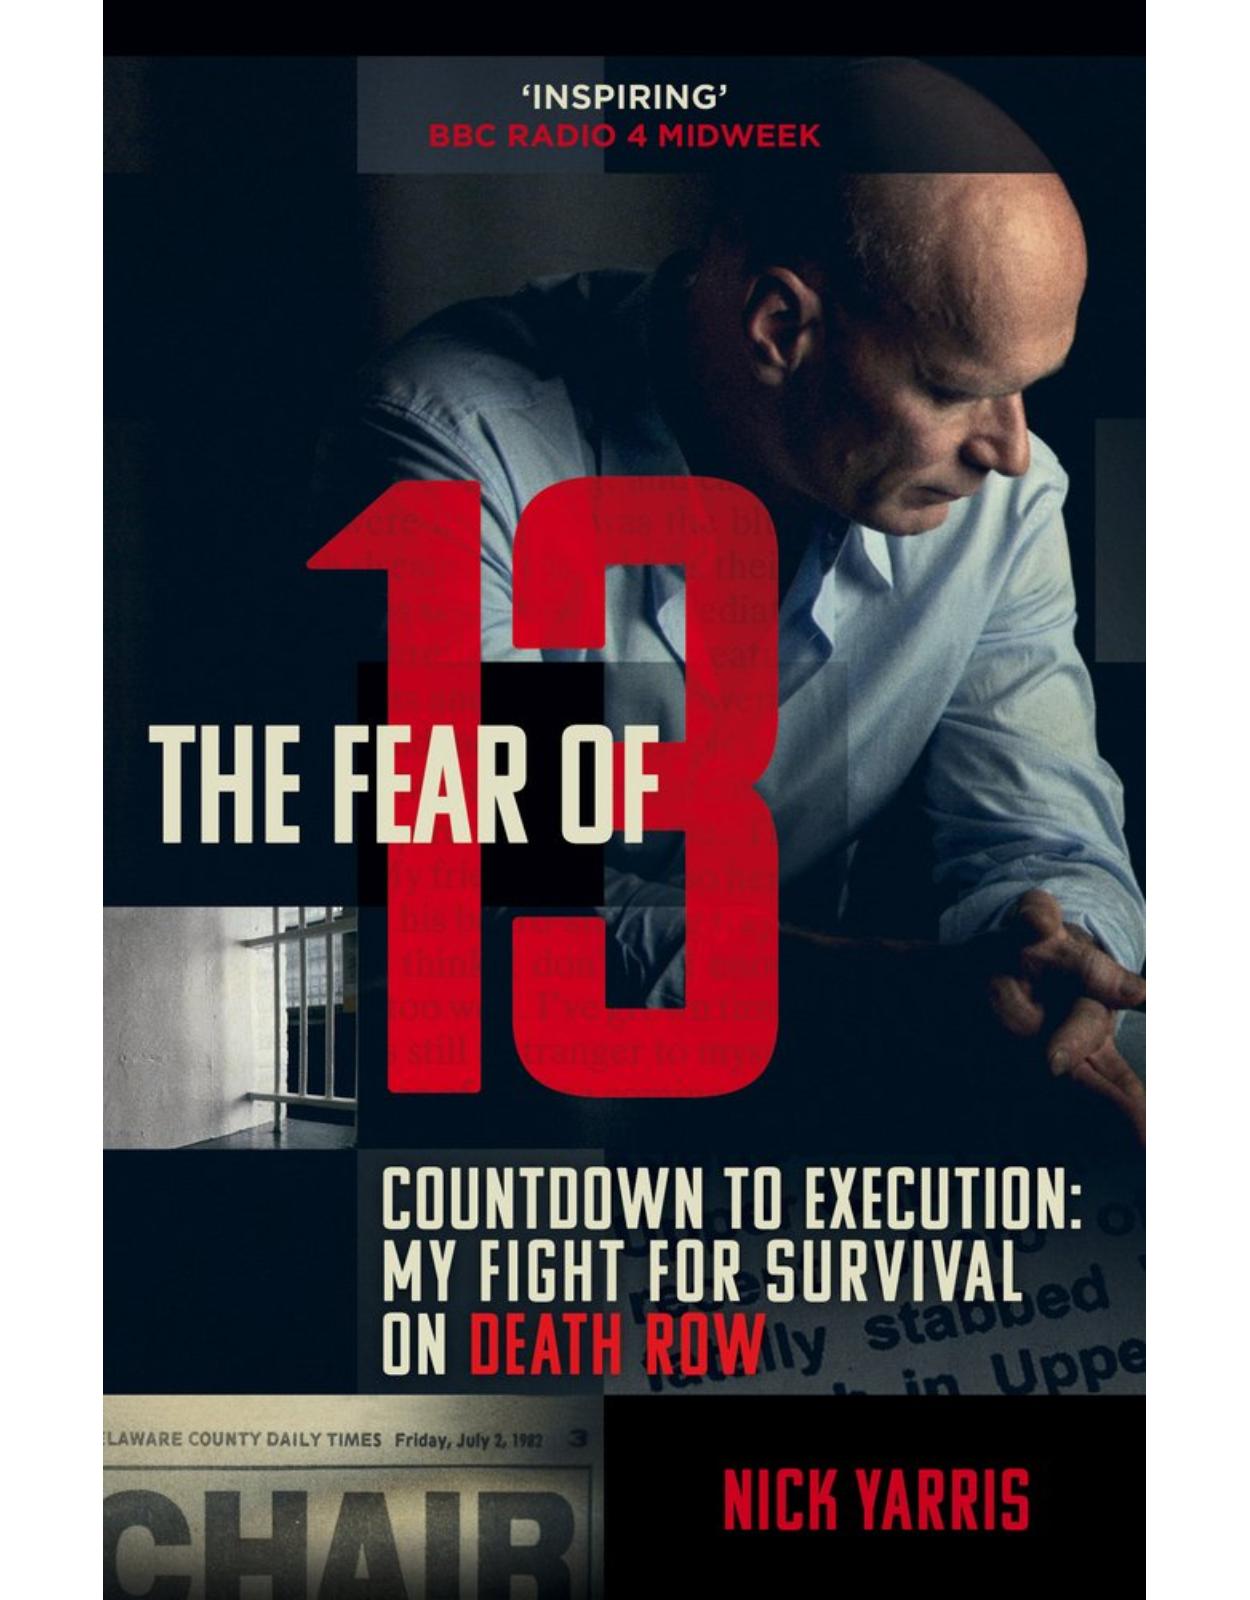 The Fear of 13: Countdown to Execution: My Fight for Survival on Death Row